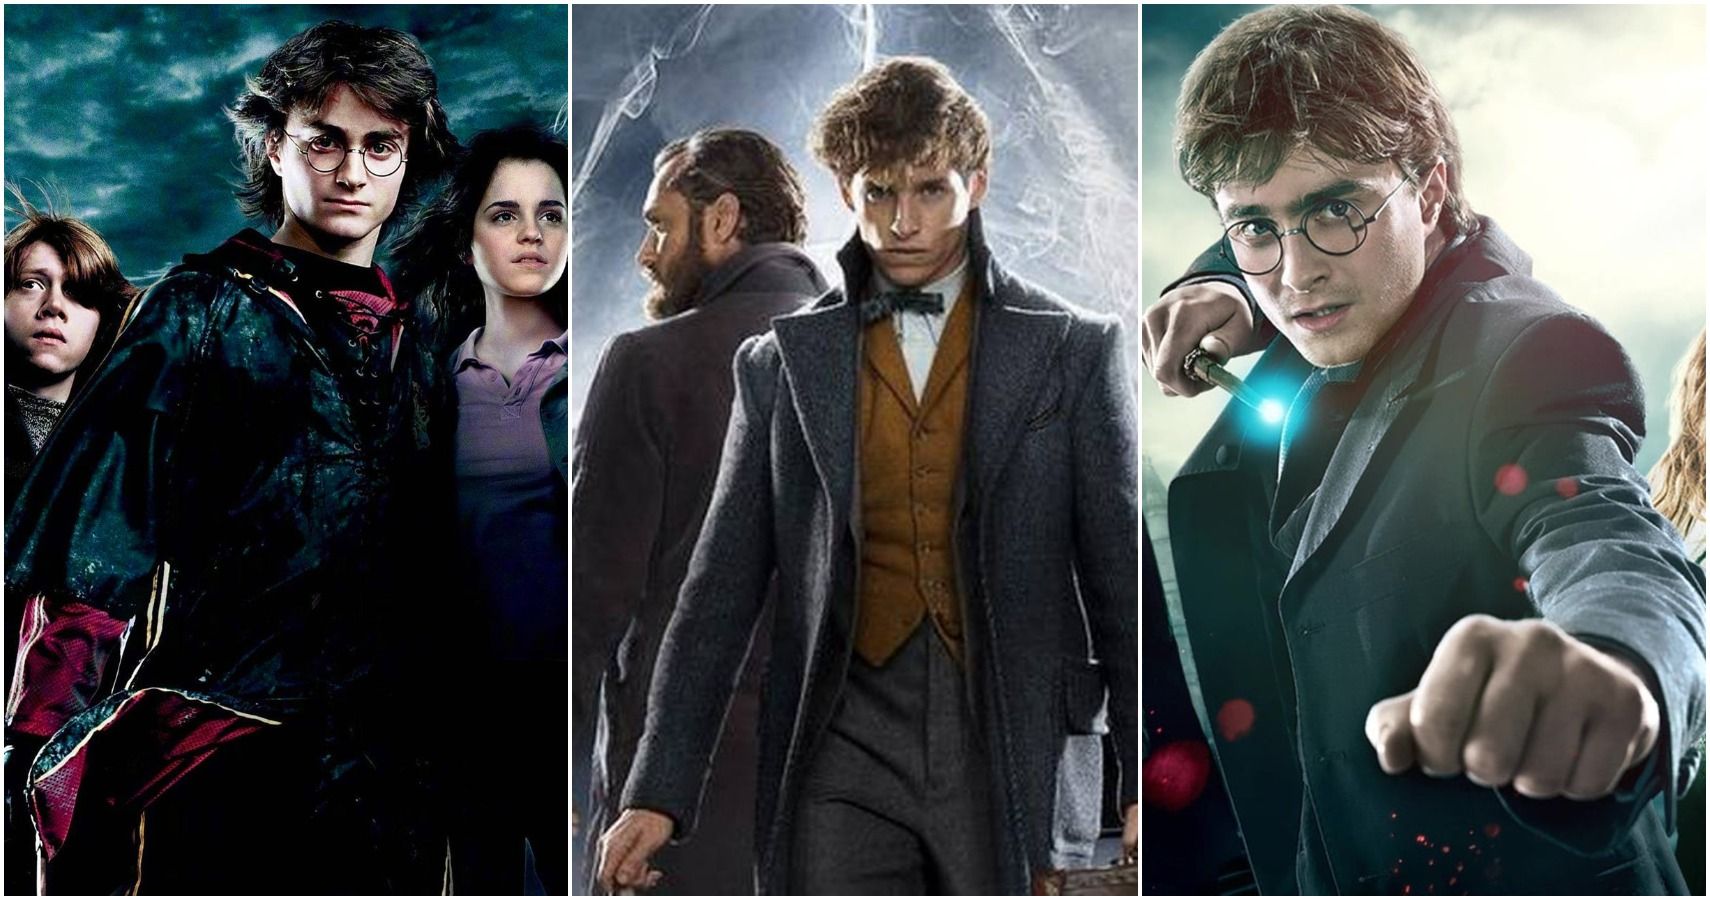 10 Best Harry Potter Video Games, Ranked According To Metacritic